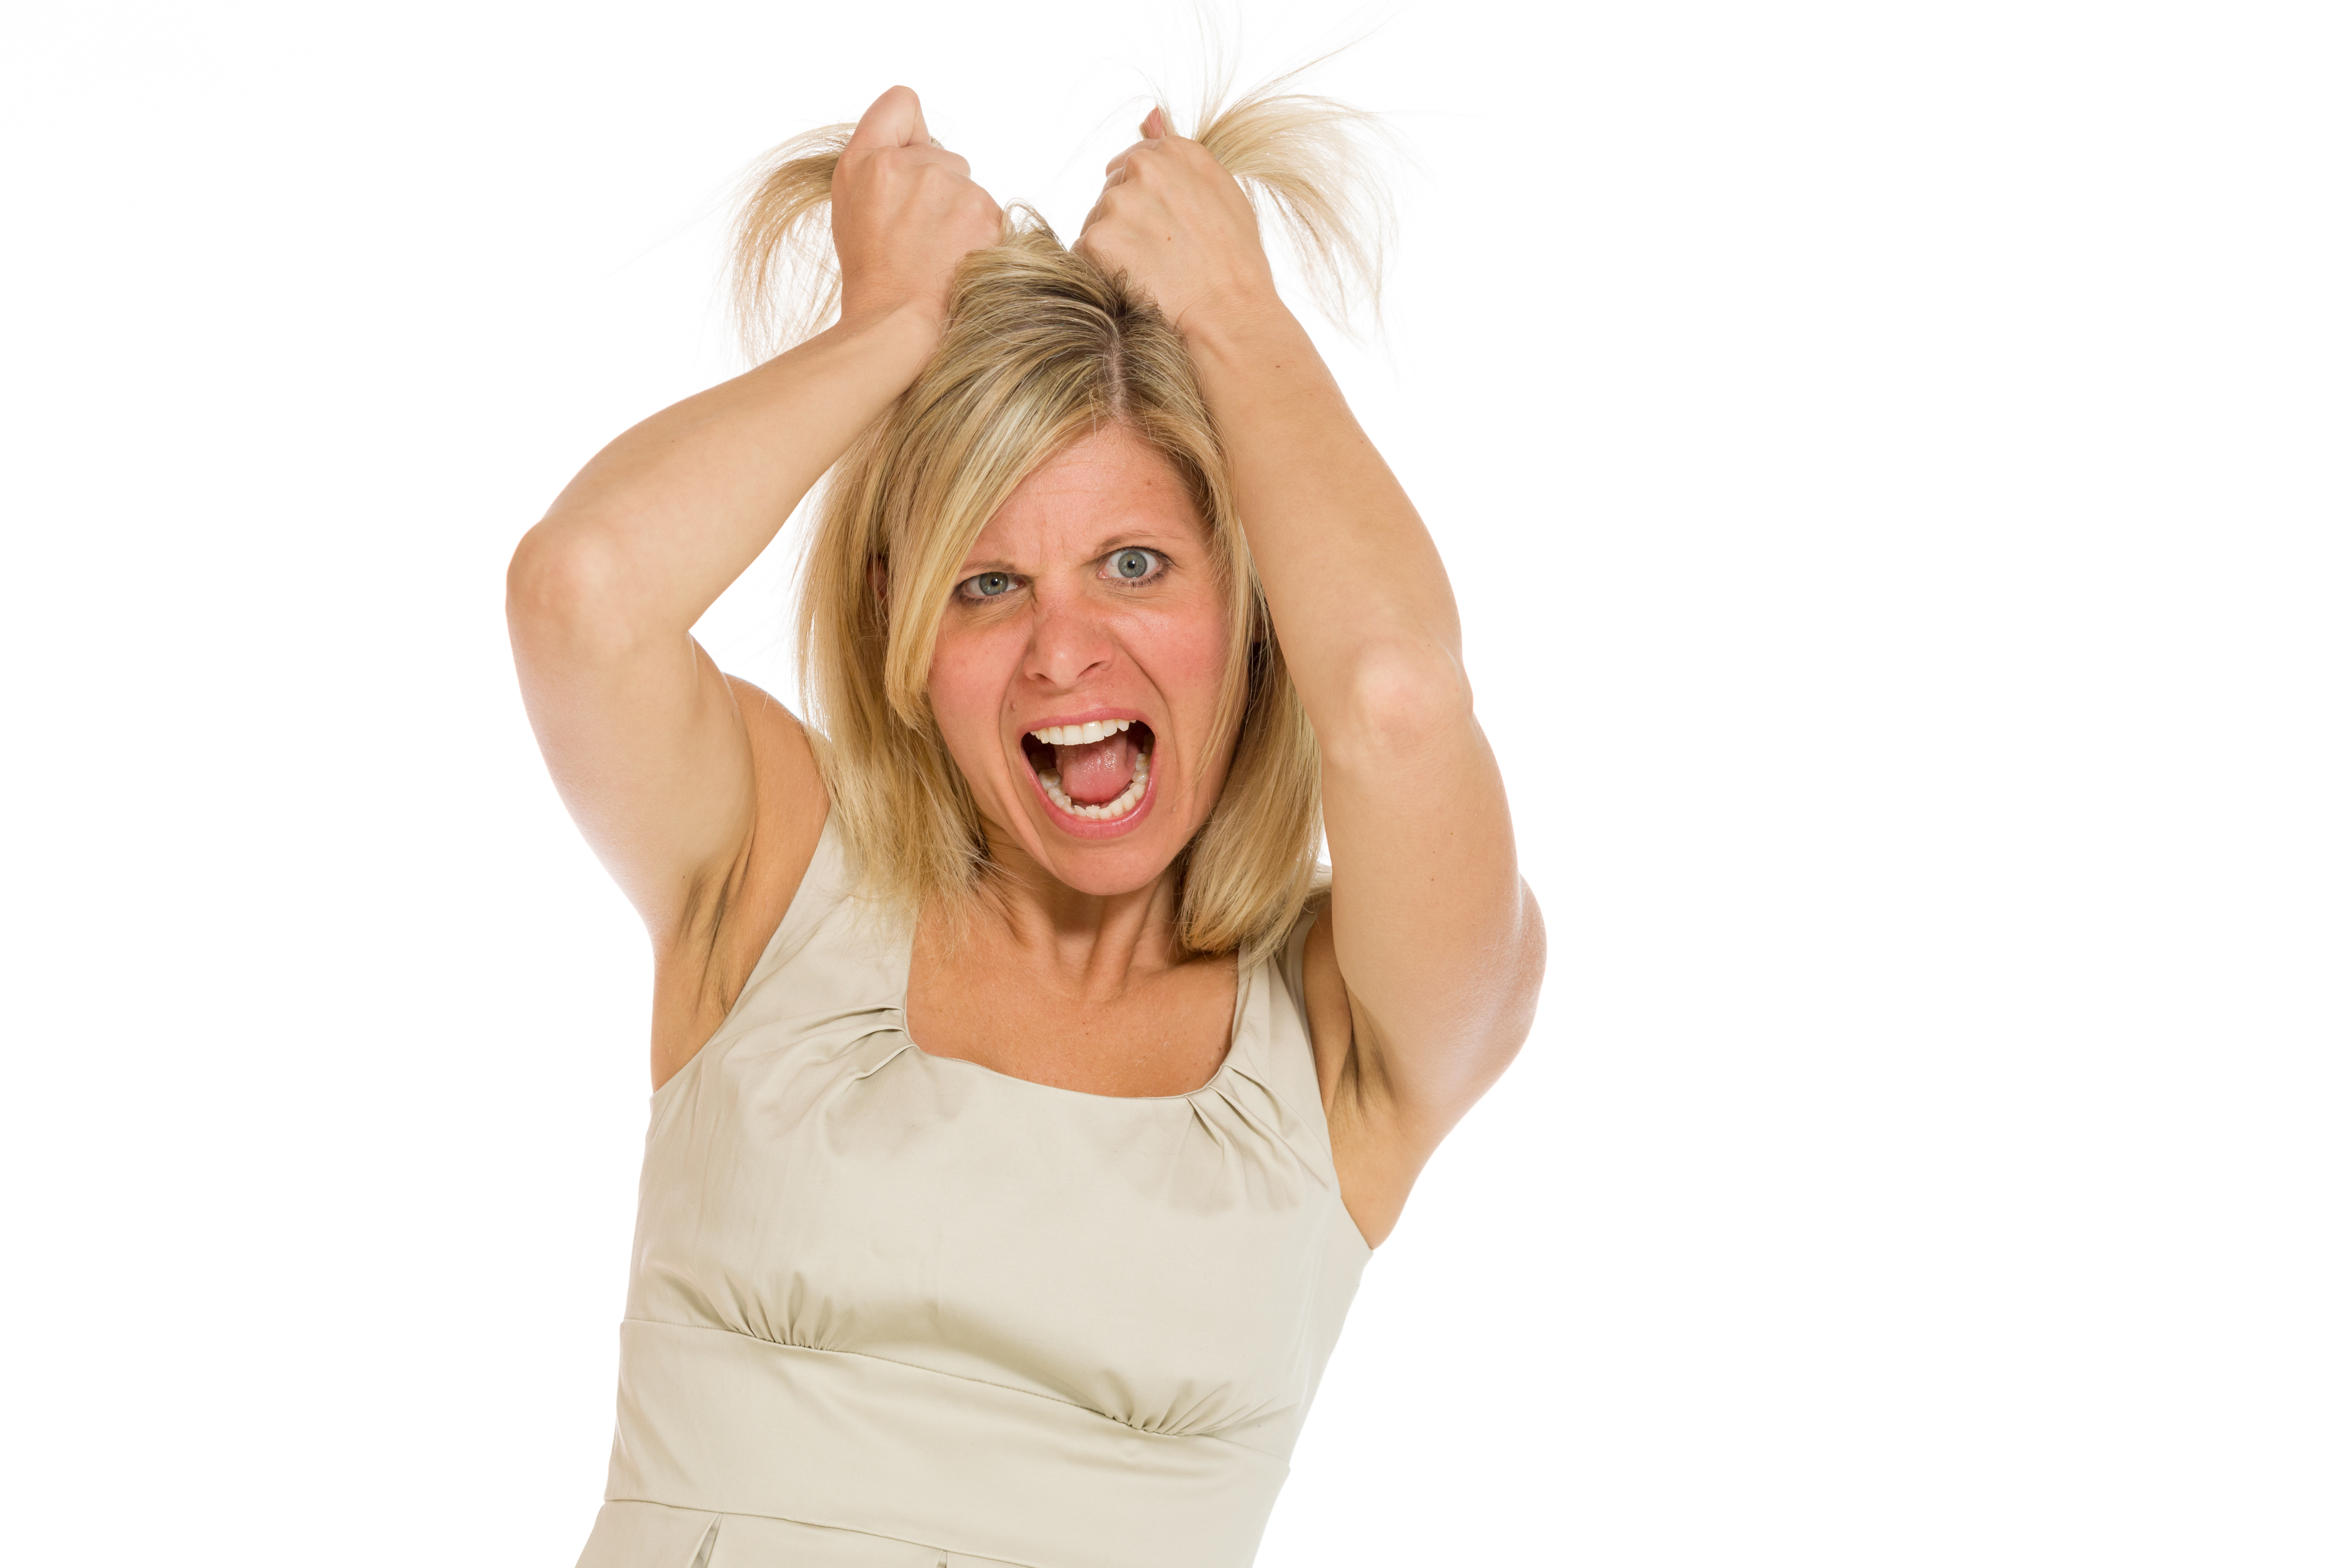 An angry woman pulling her hair | Source: Shutterstock